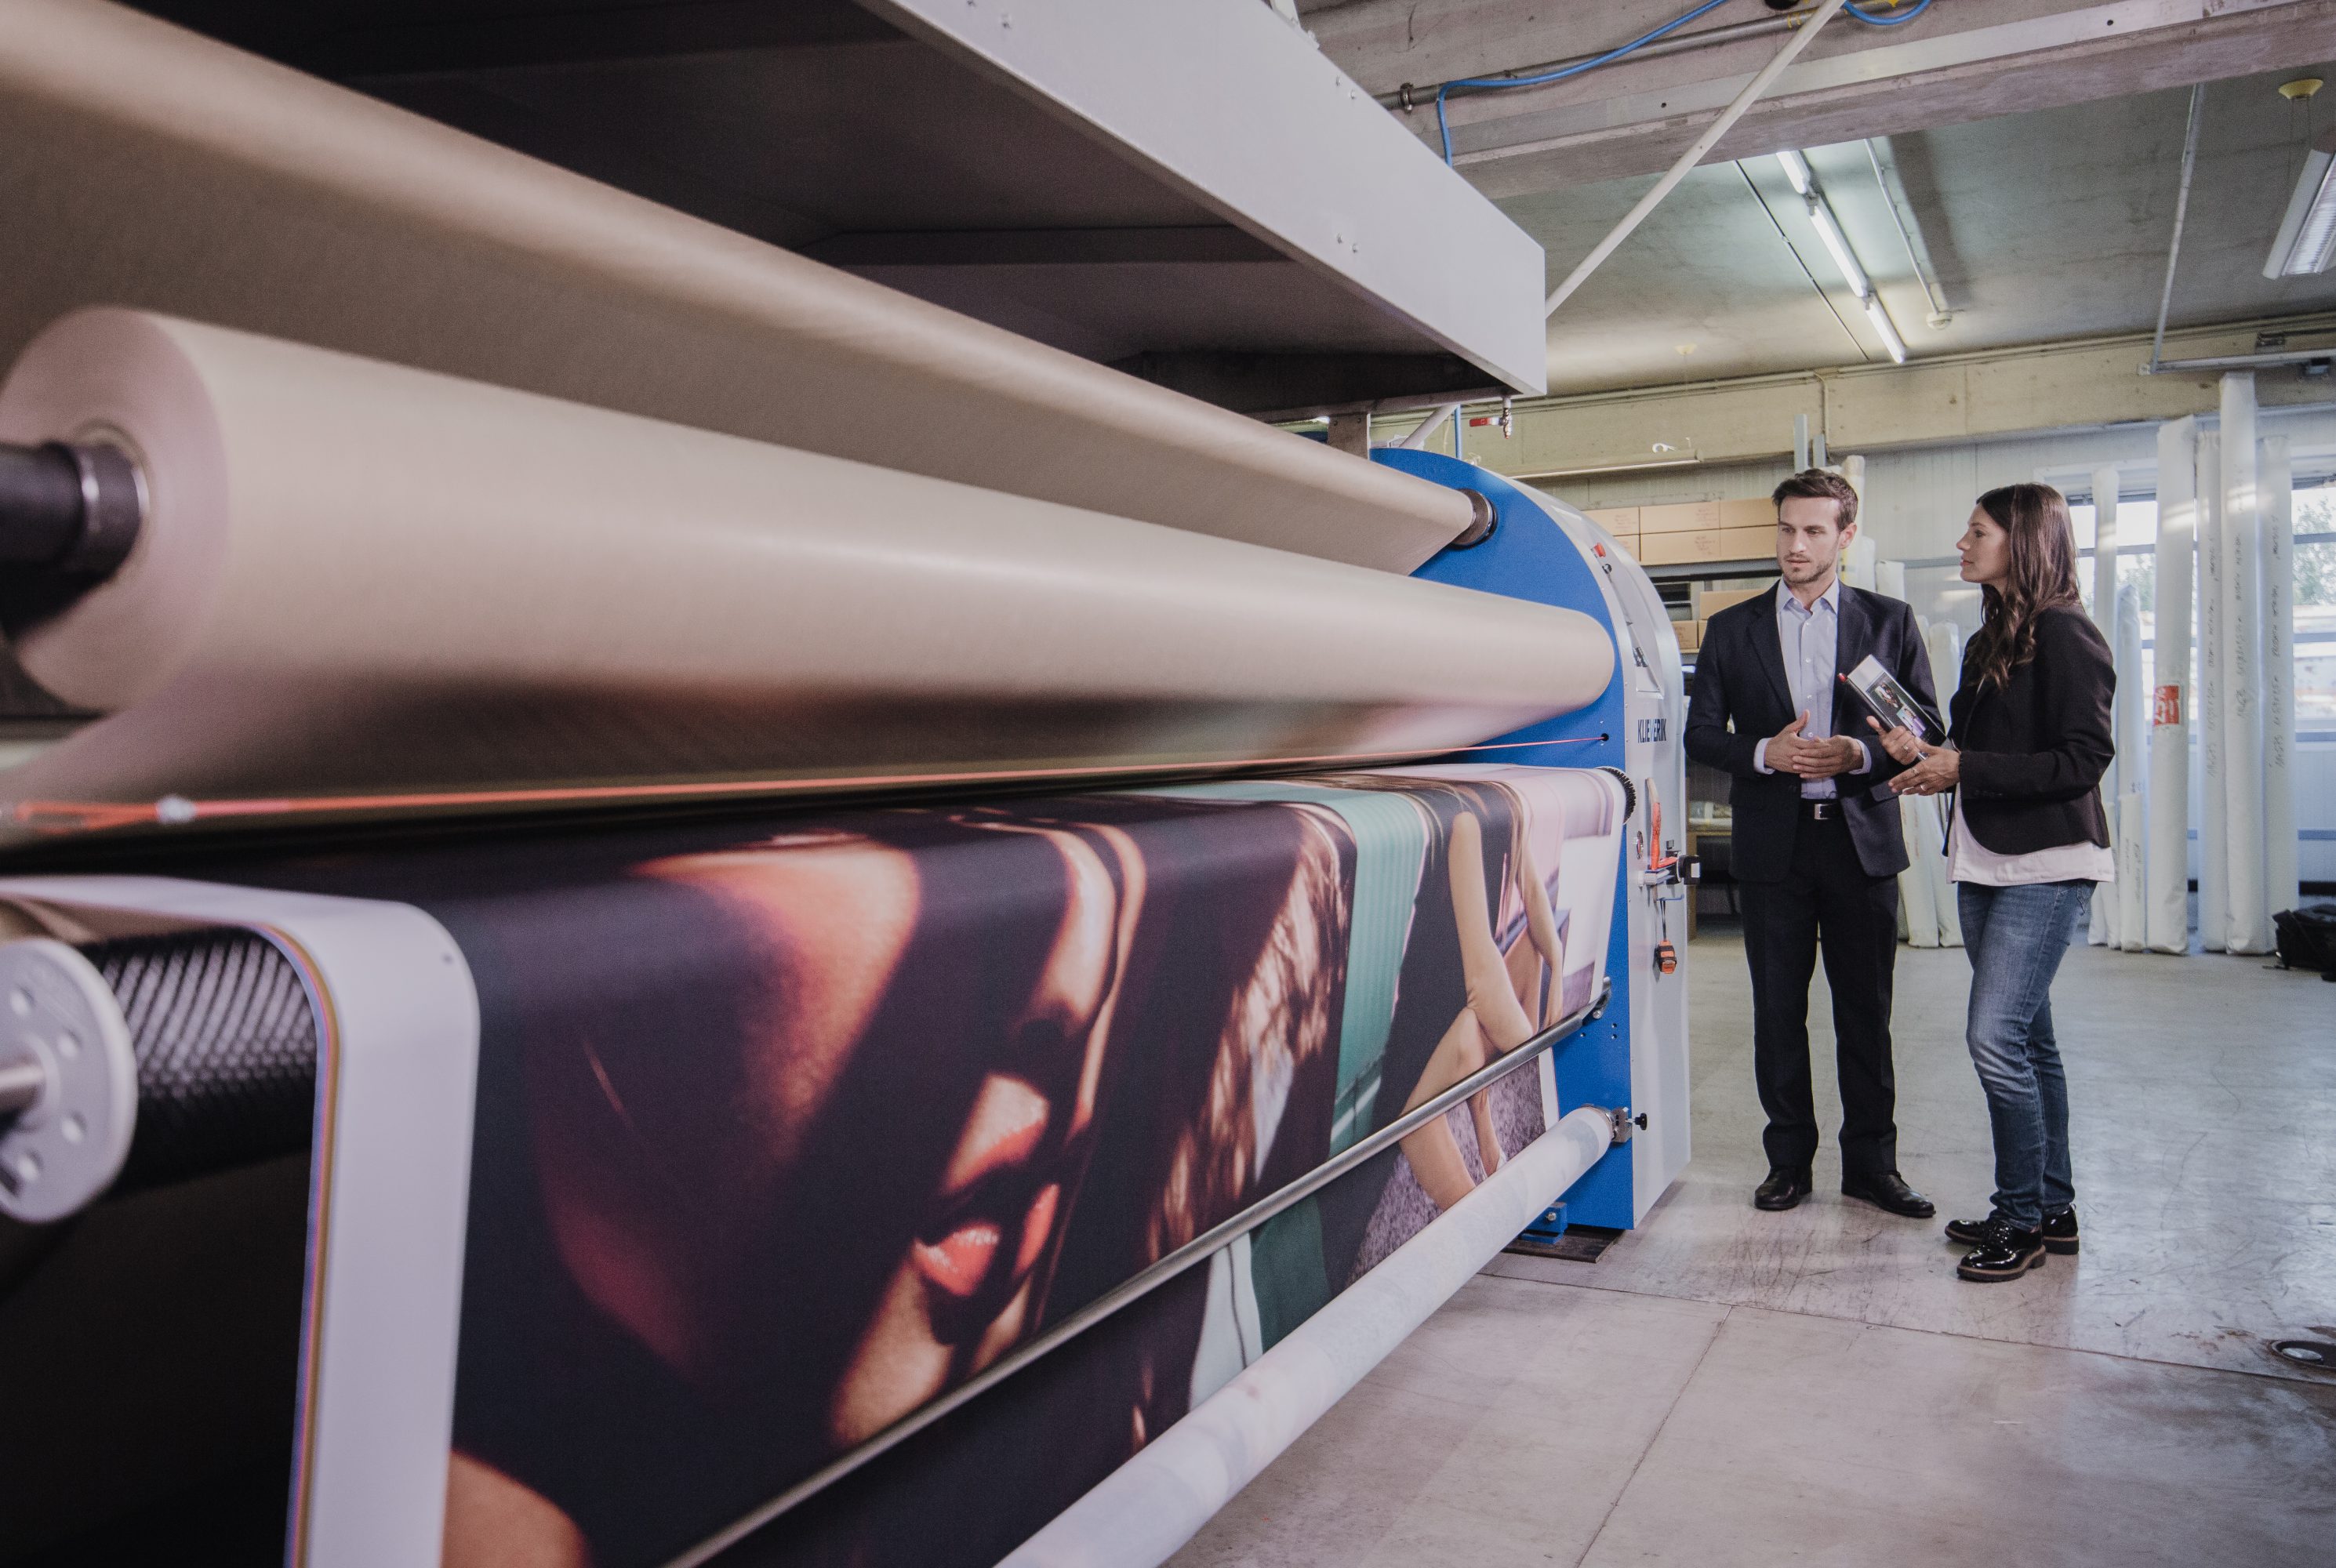 Sublimation printing: Brilliant large-format printing as a real eye-catcher